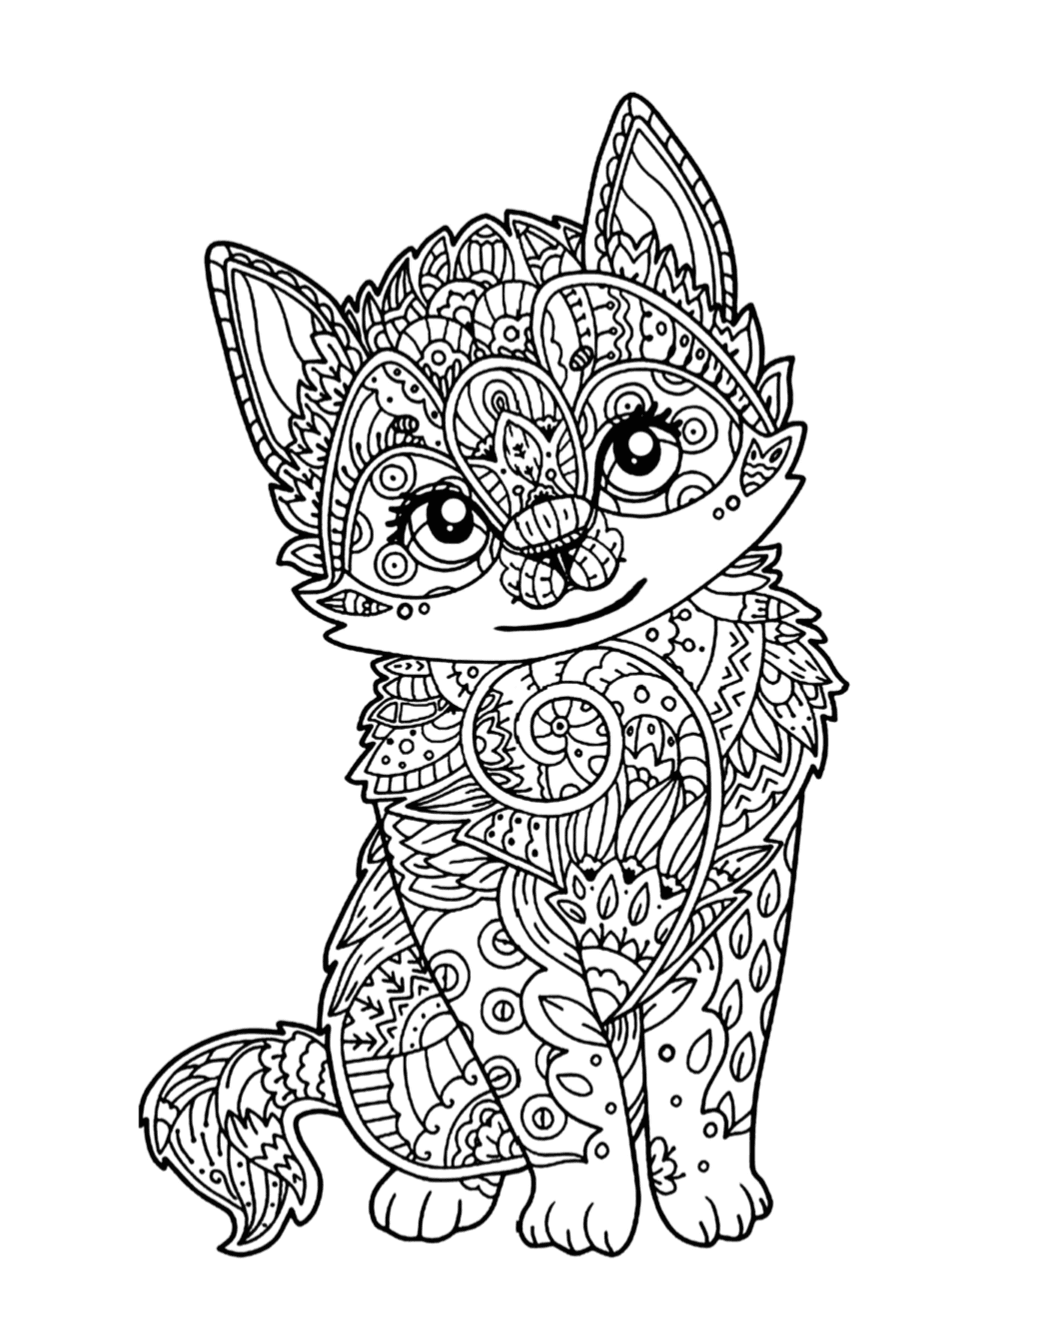 Cute Kitten Coloring Page | Free Download